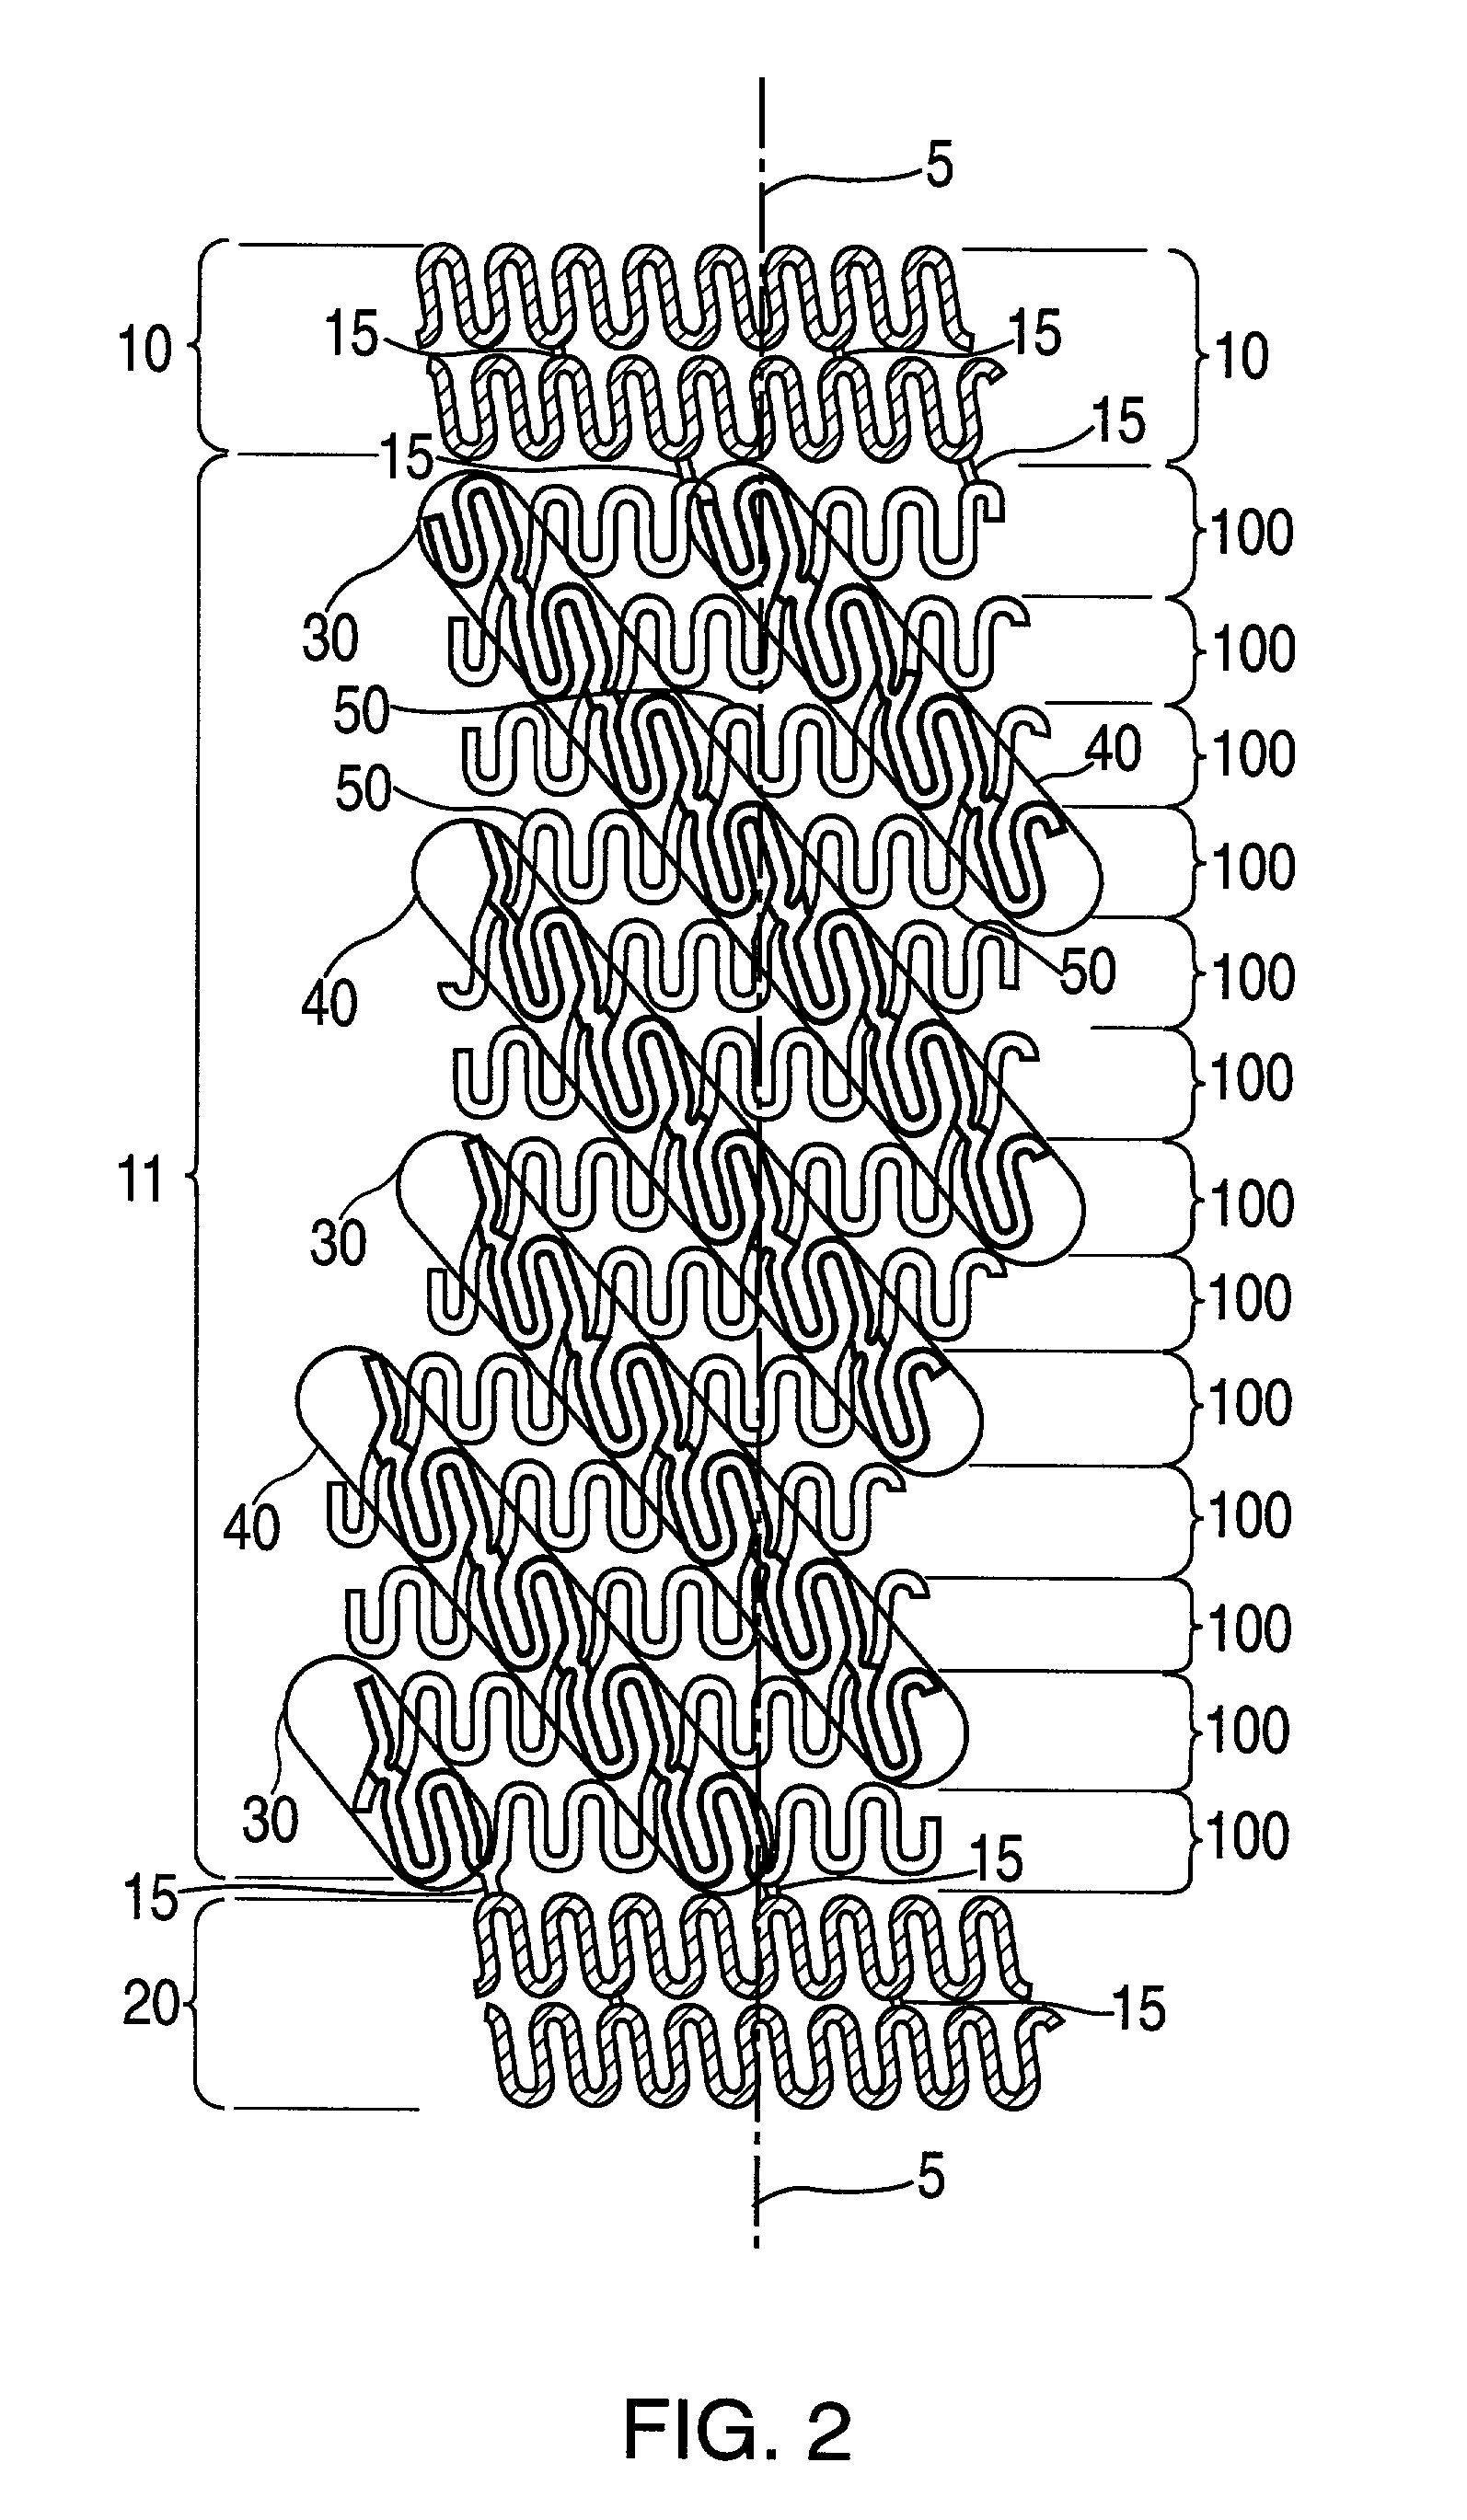 Stent having helical elements